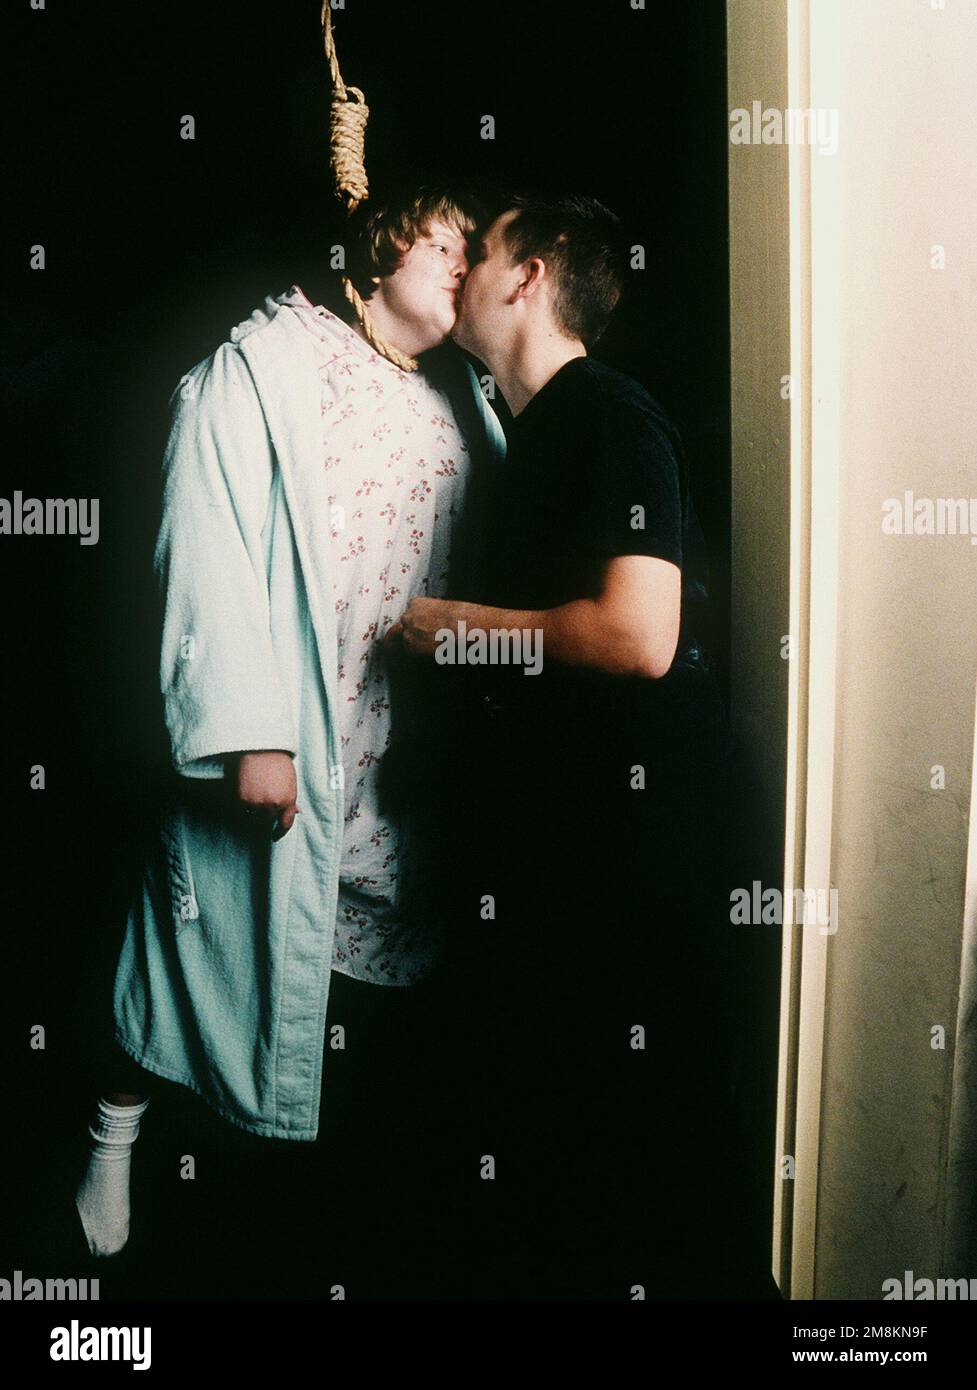 Military Photographer of the Year Winner 1996 Title: You Keep Me Hanging On Category: Portfolio Brief Description: A man and a woman, with a noose around her neck, stand in a doorway exchanging a gentle kiss. Exact Date Shot Unknown. Country: Unknown Stock Photo